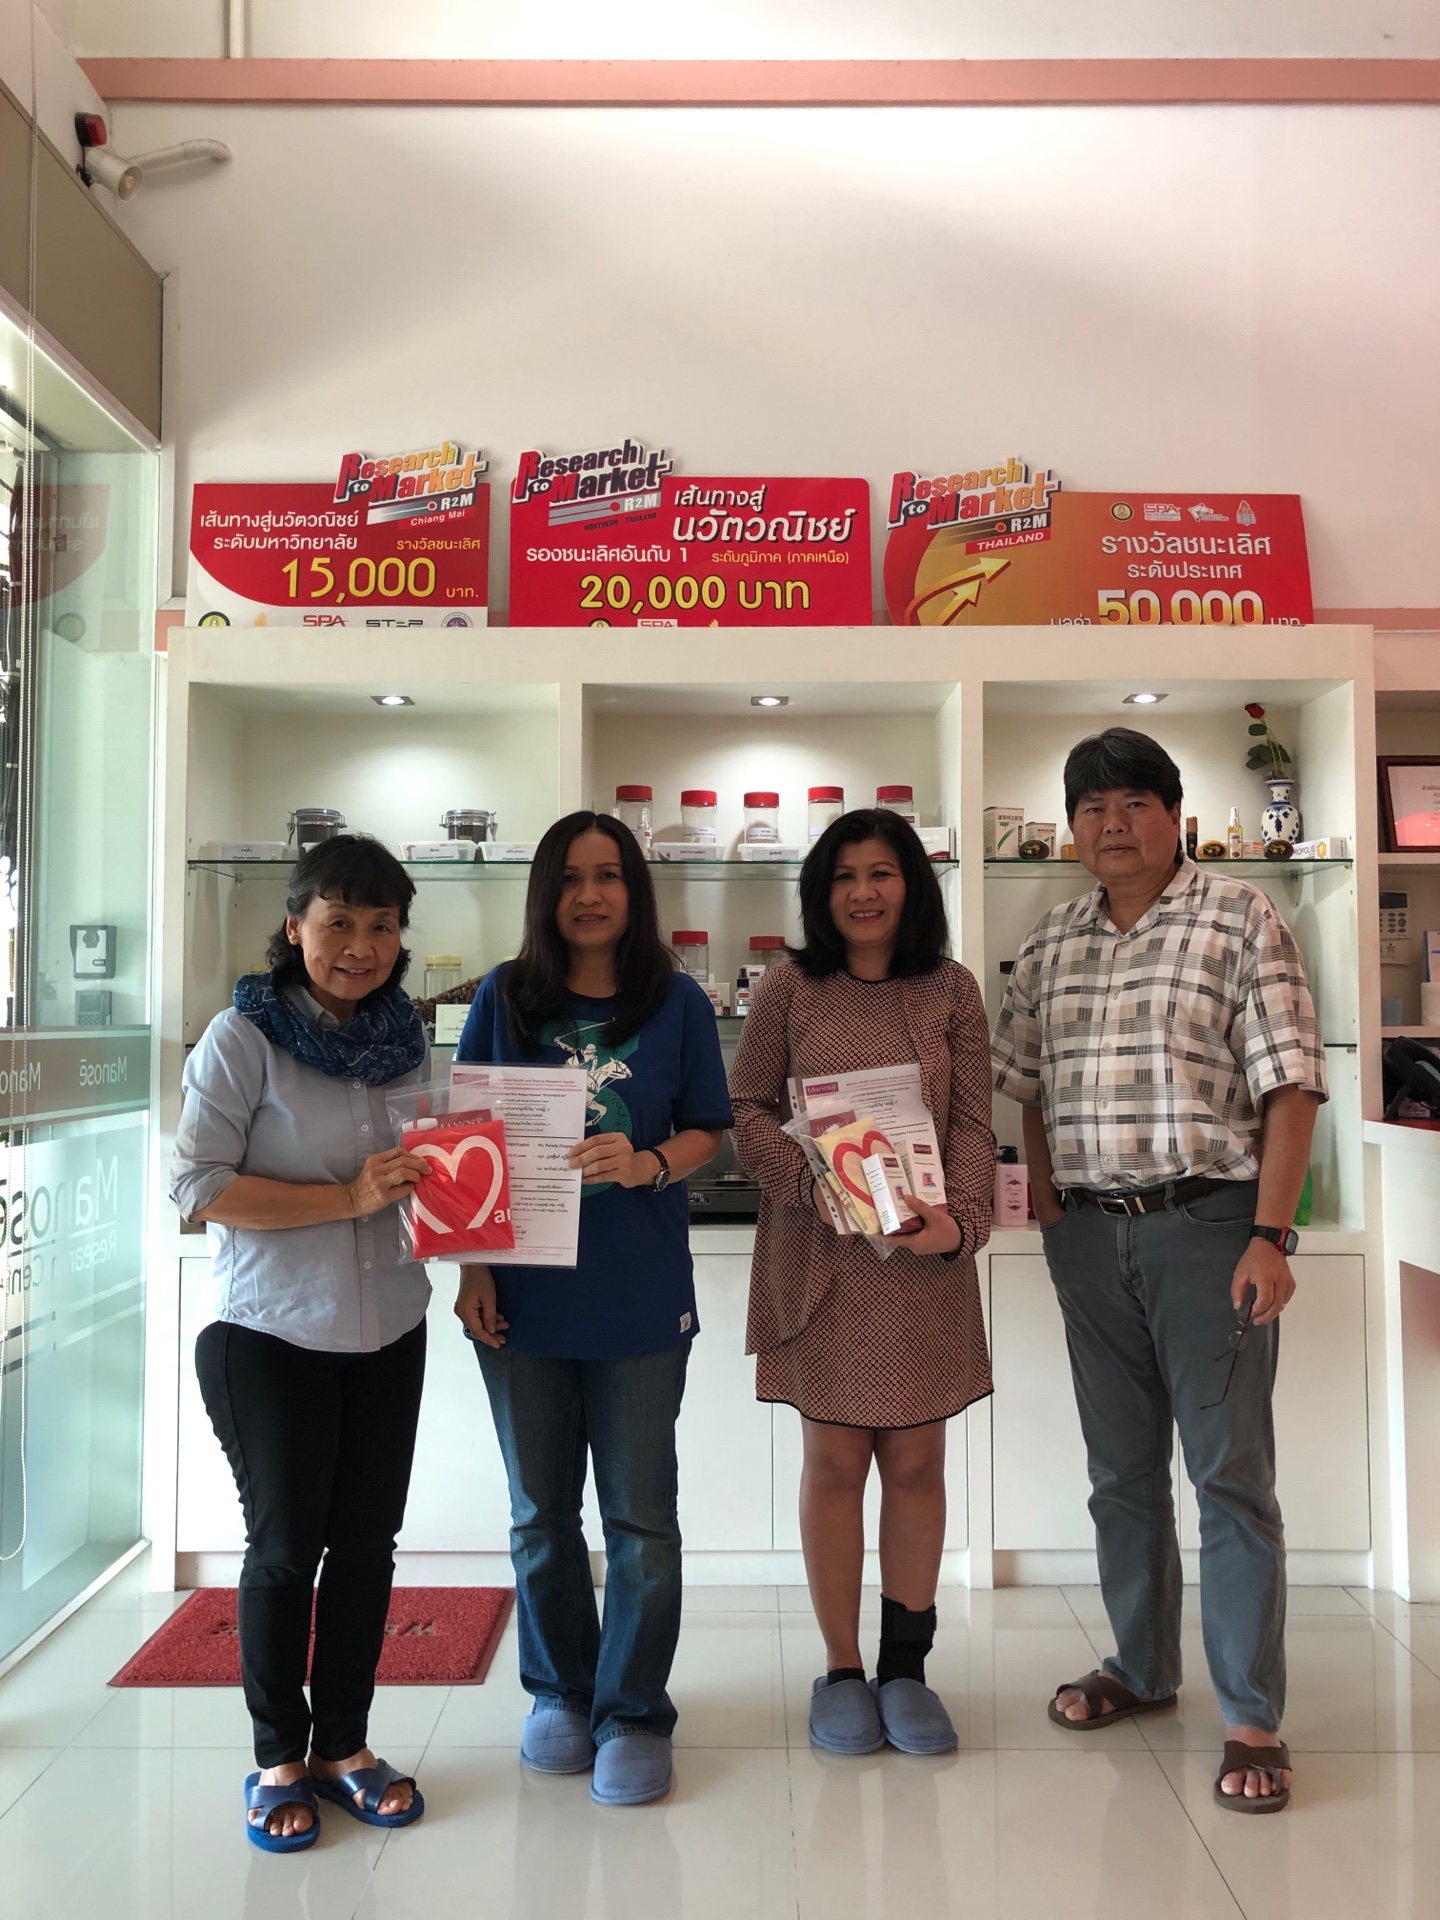 Ms. Puangphaka Chaiworapongsa from Henry Ford Hospital, Detroit, Michigun, USA and Ms. Porntip Pengune have visited Manose Health and Beauty Research Center